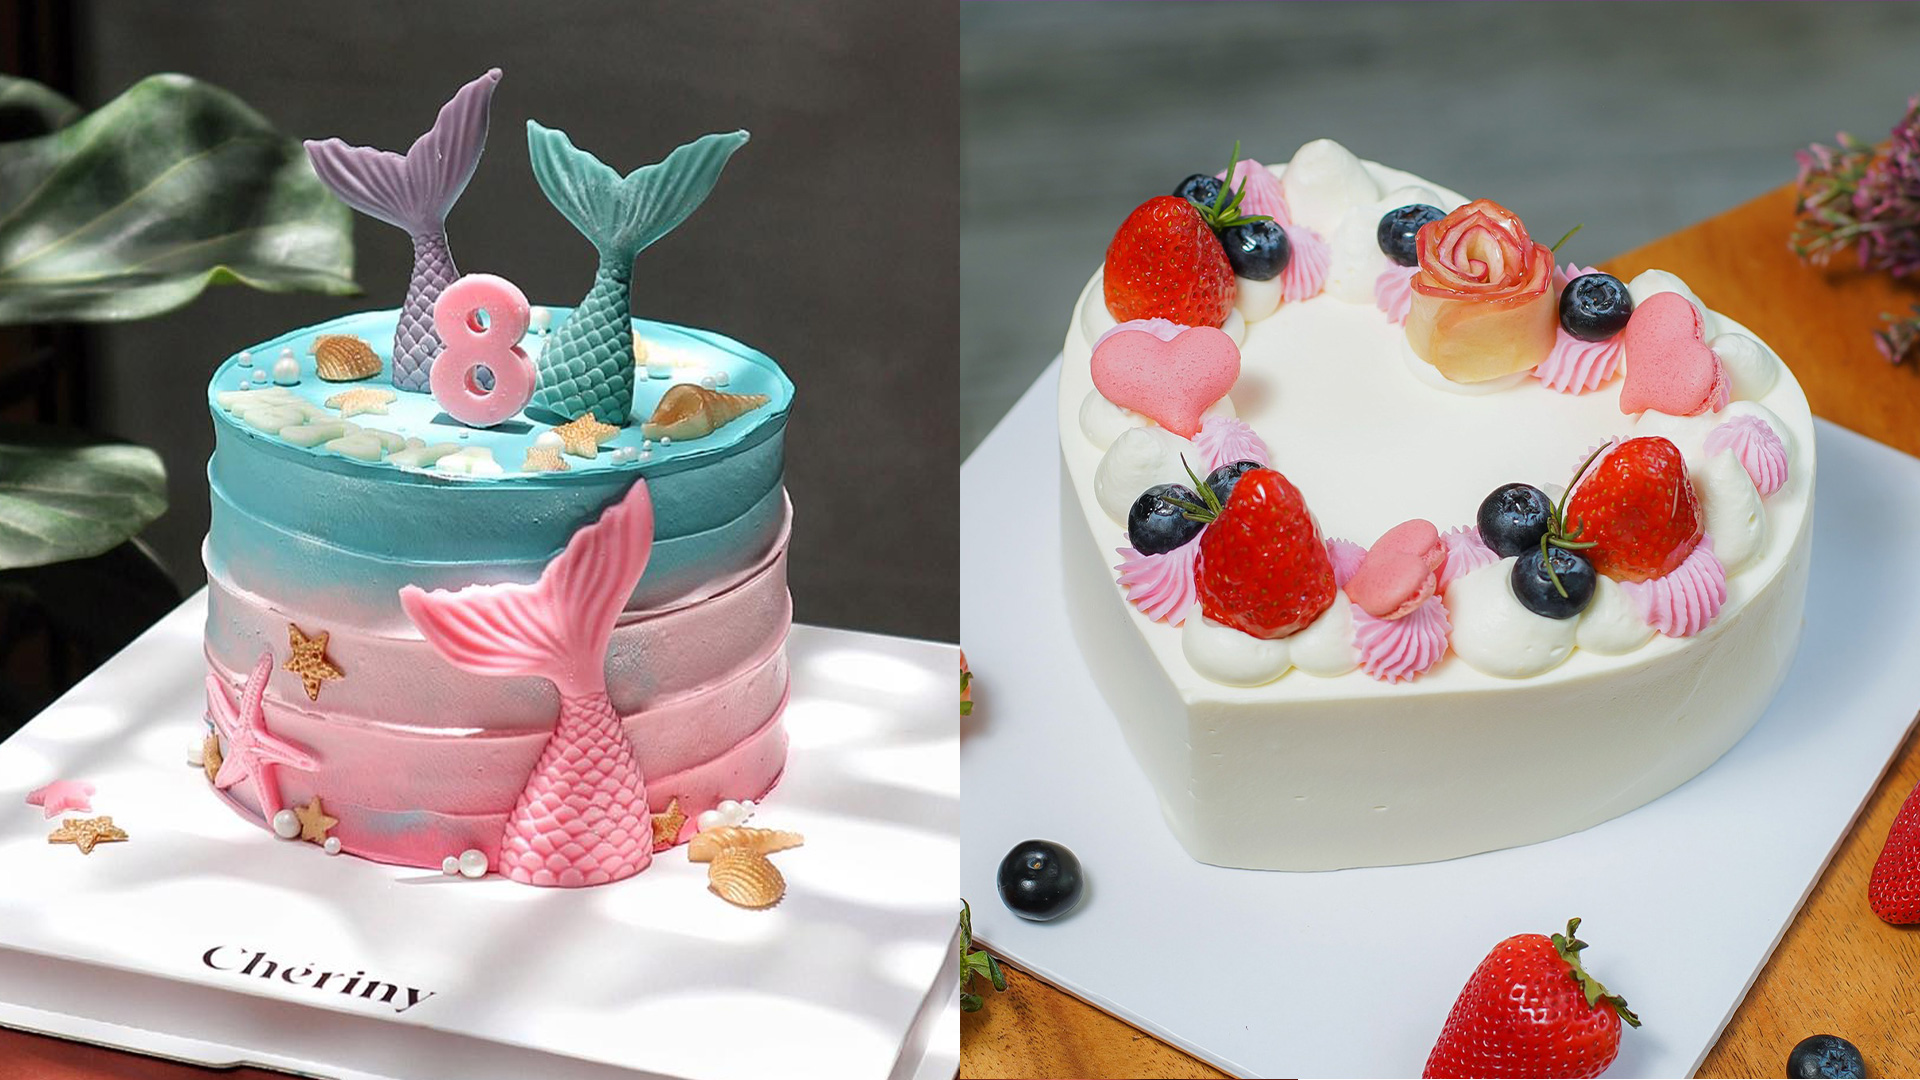 Here are 5 bakeries with some of the most adorable cakes in Phnom Penh!